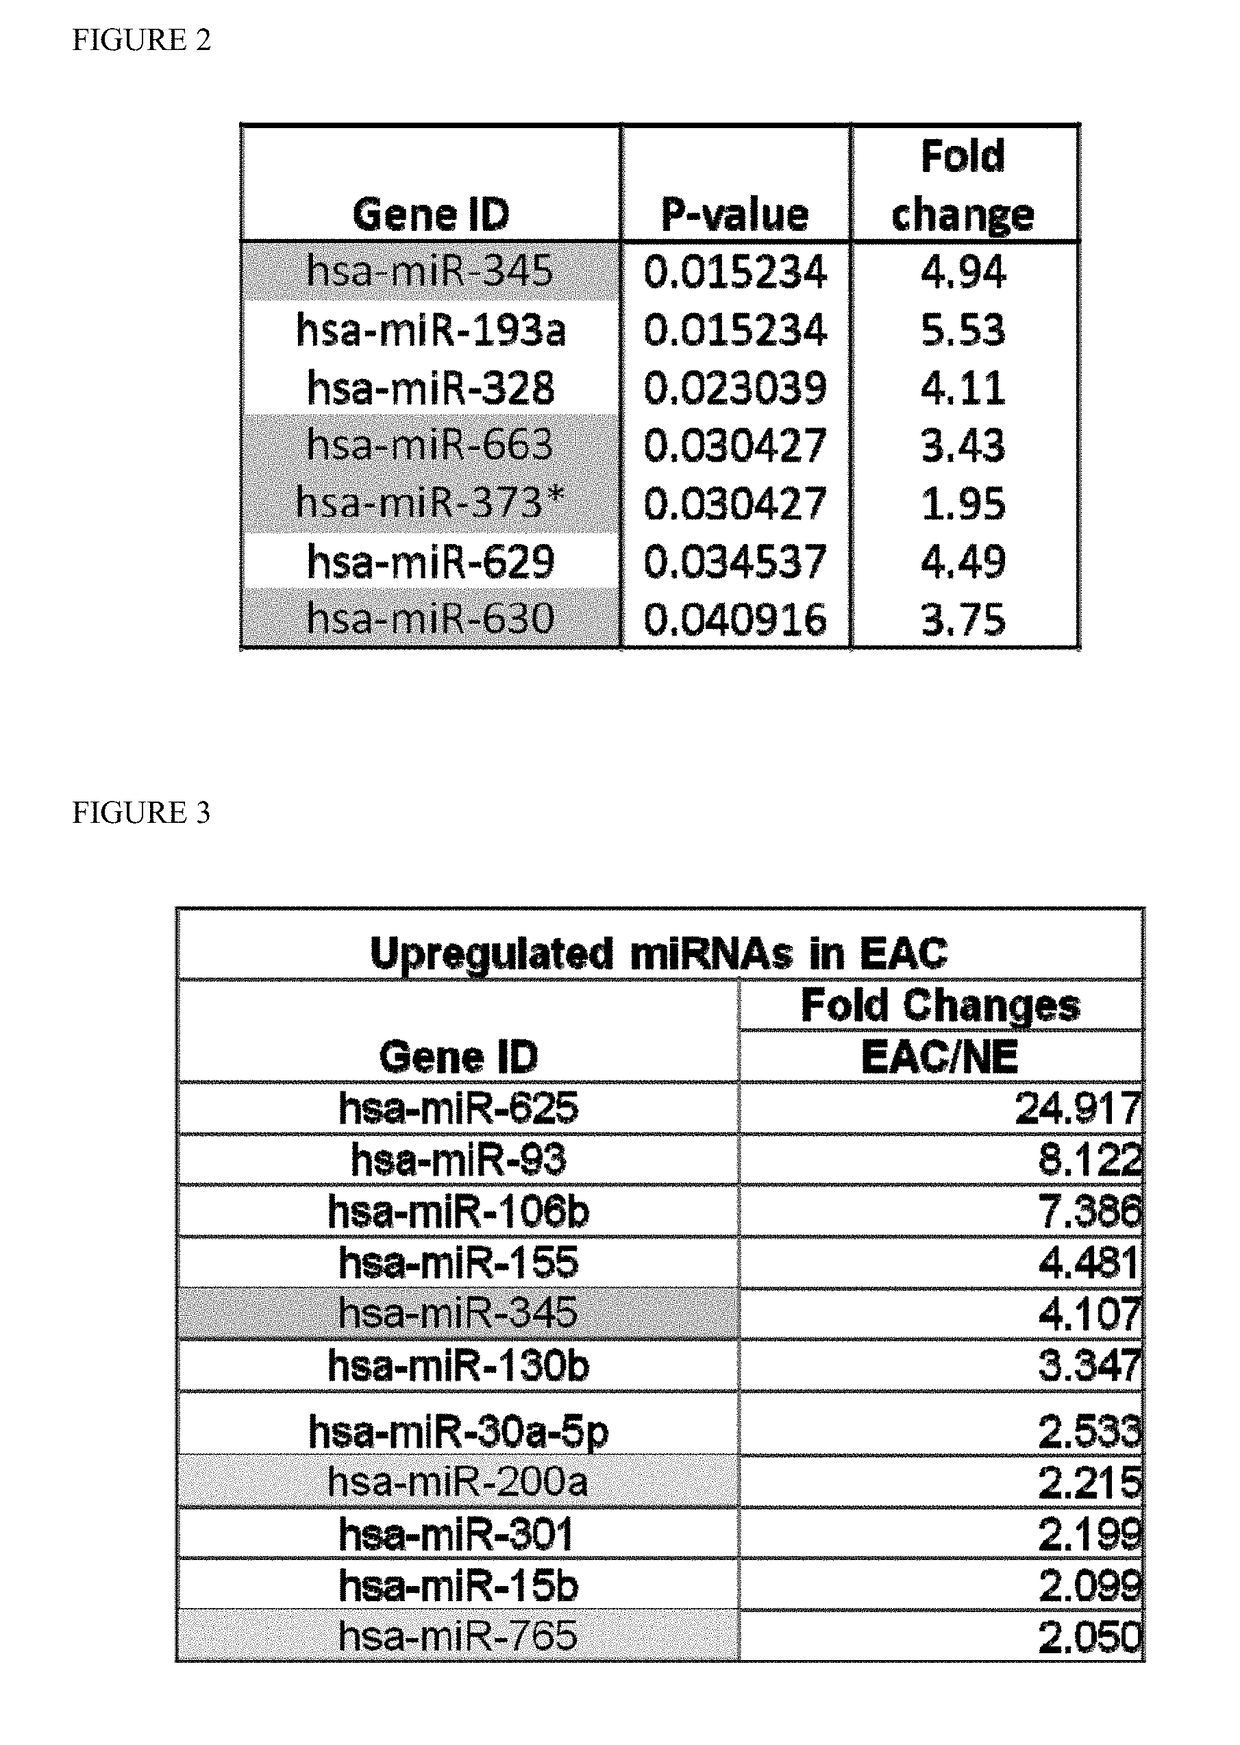 Serum-based mirna microarray and its use in diagnosis and treatment of barrett's esophagus (BE) and esophageal adenocarcinoma (EAC)